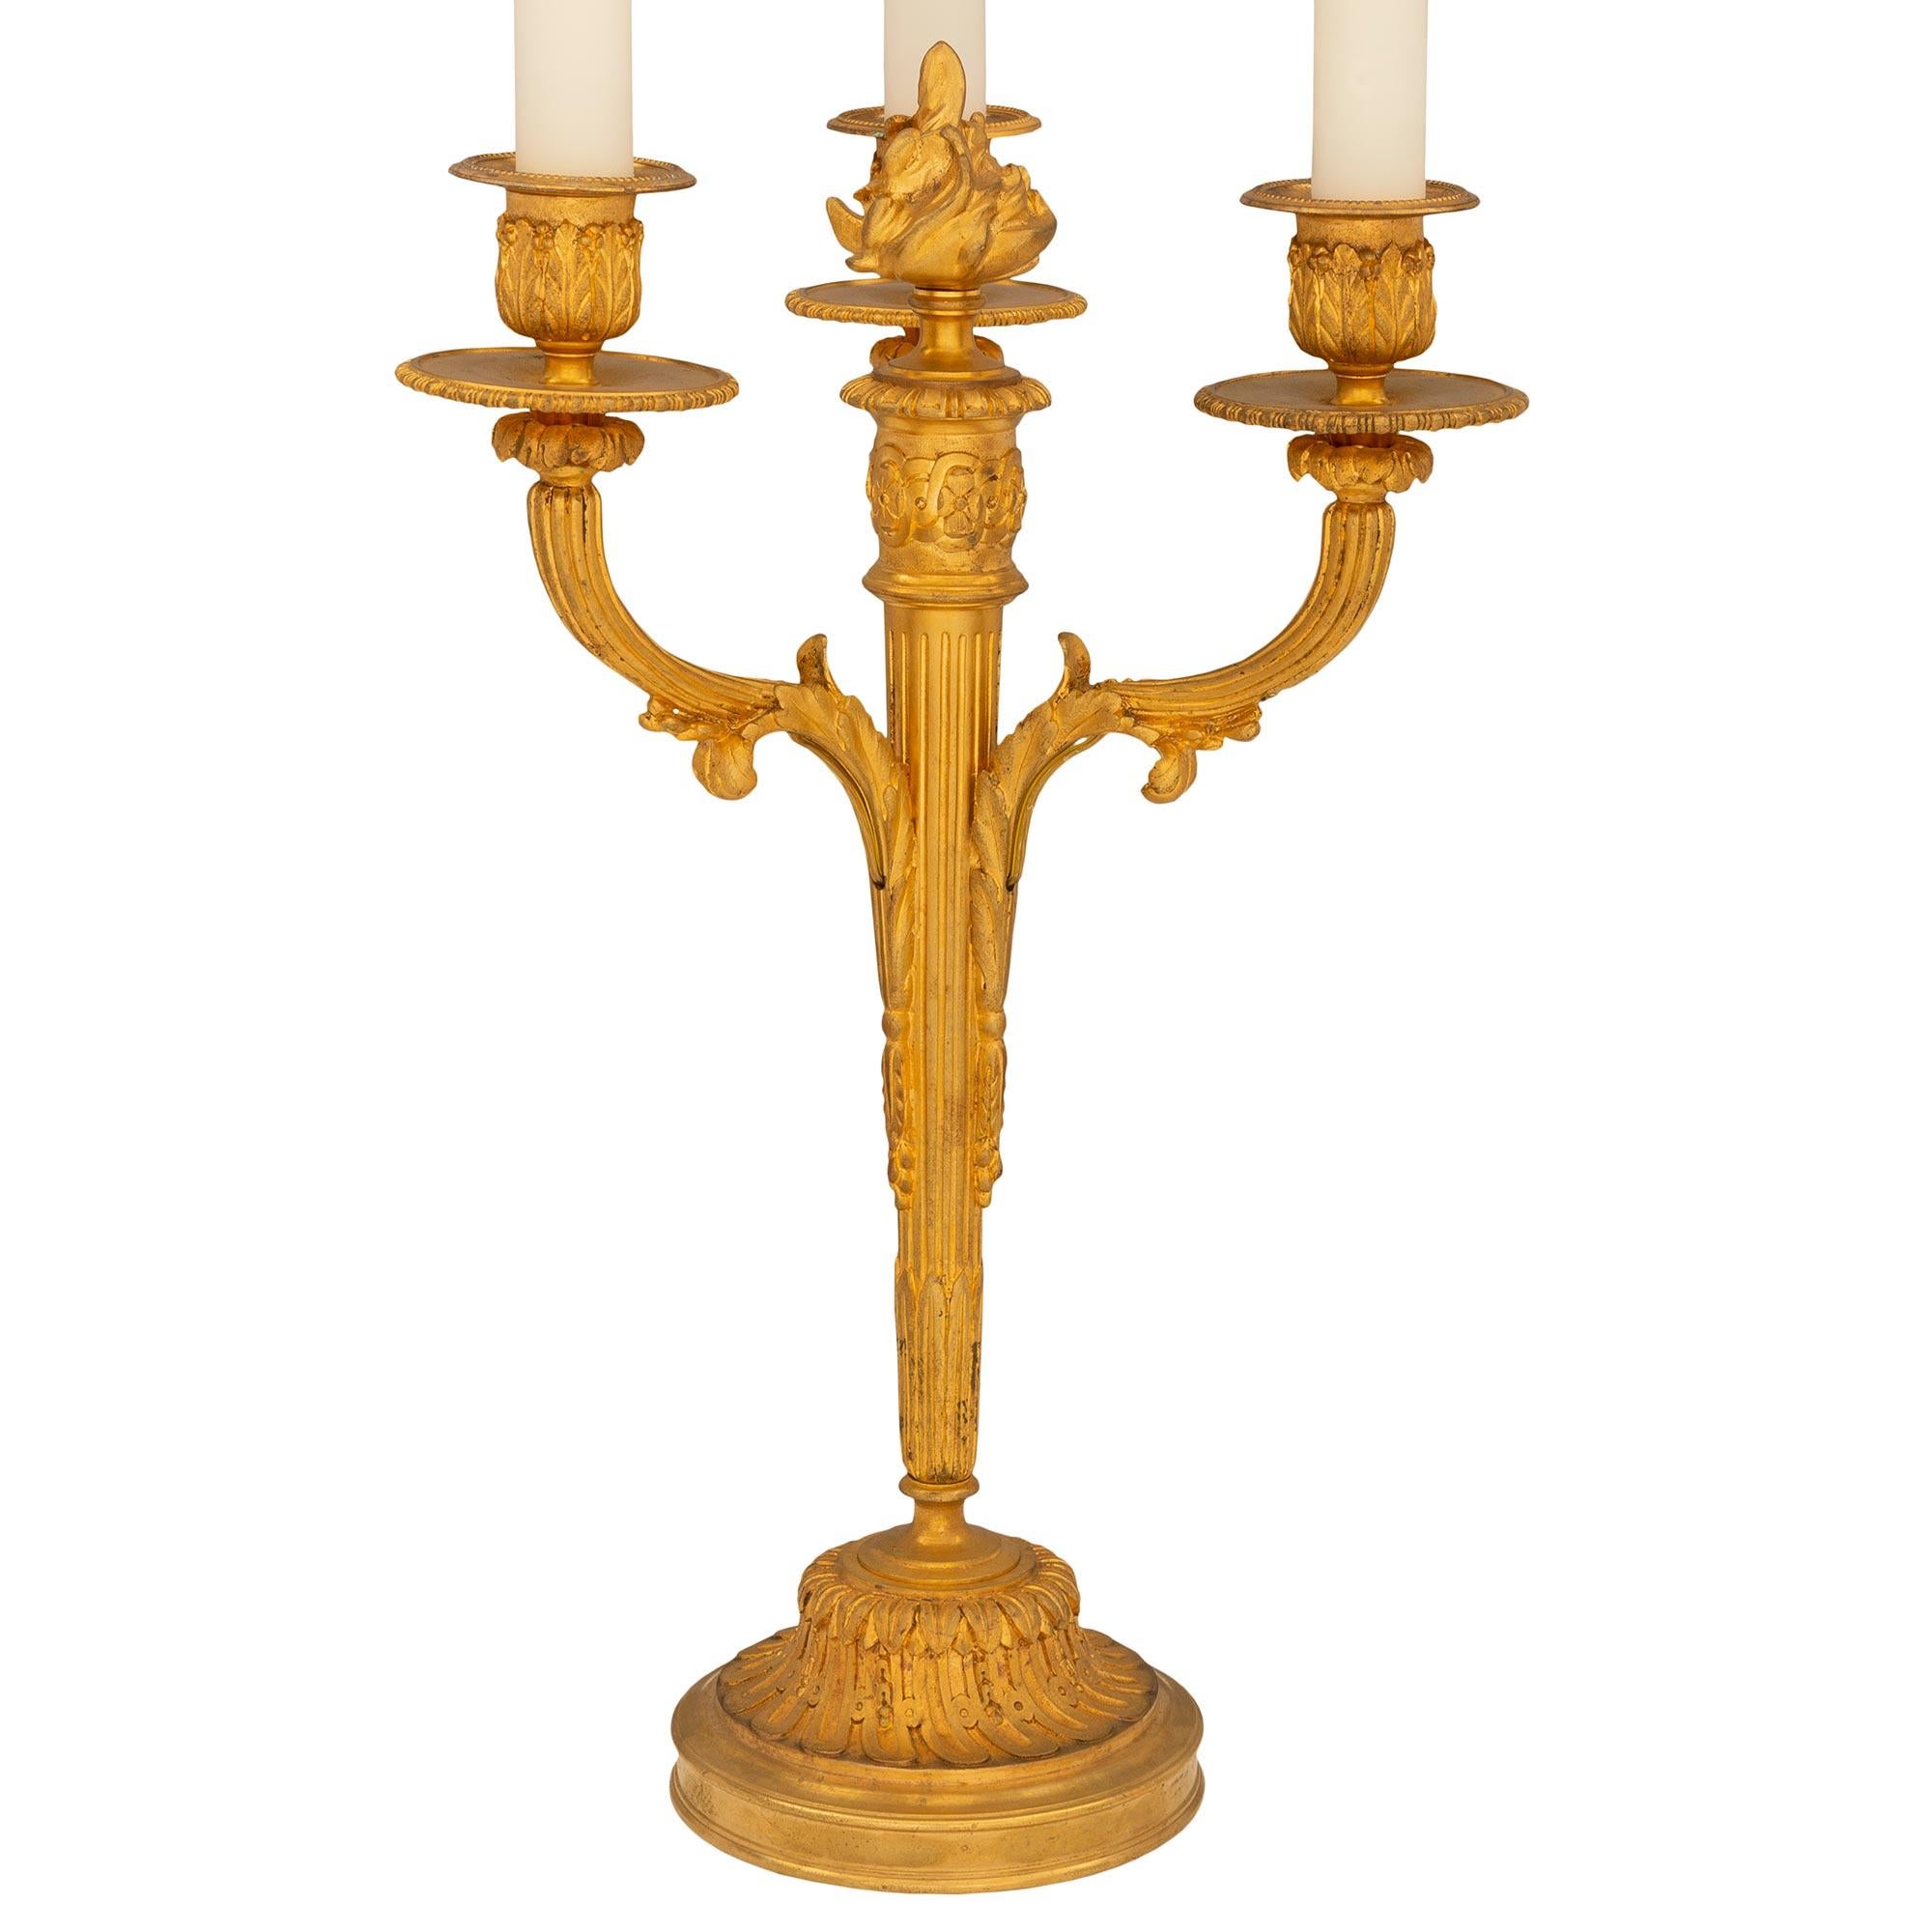 Pair of French 19th Century Louis XVI St. Ormolu Candelabra Lamps In Good Condition For Sale In West Palm Beach, FL